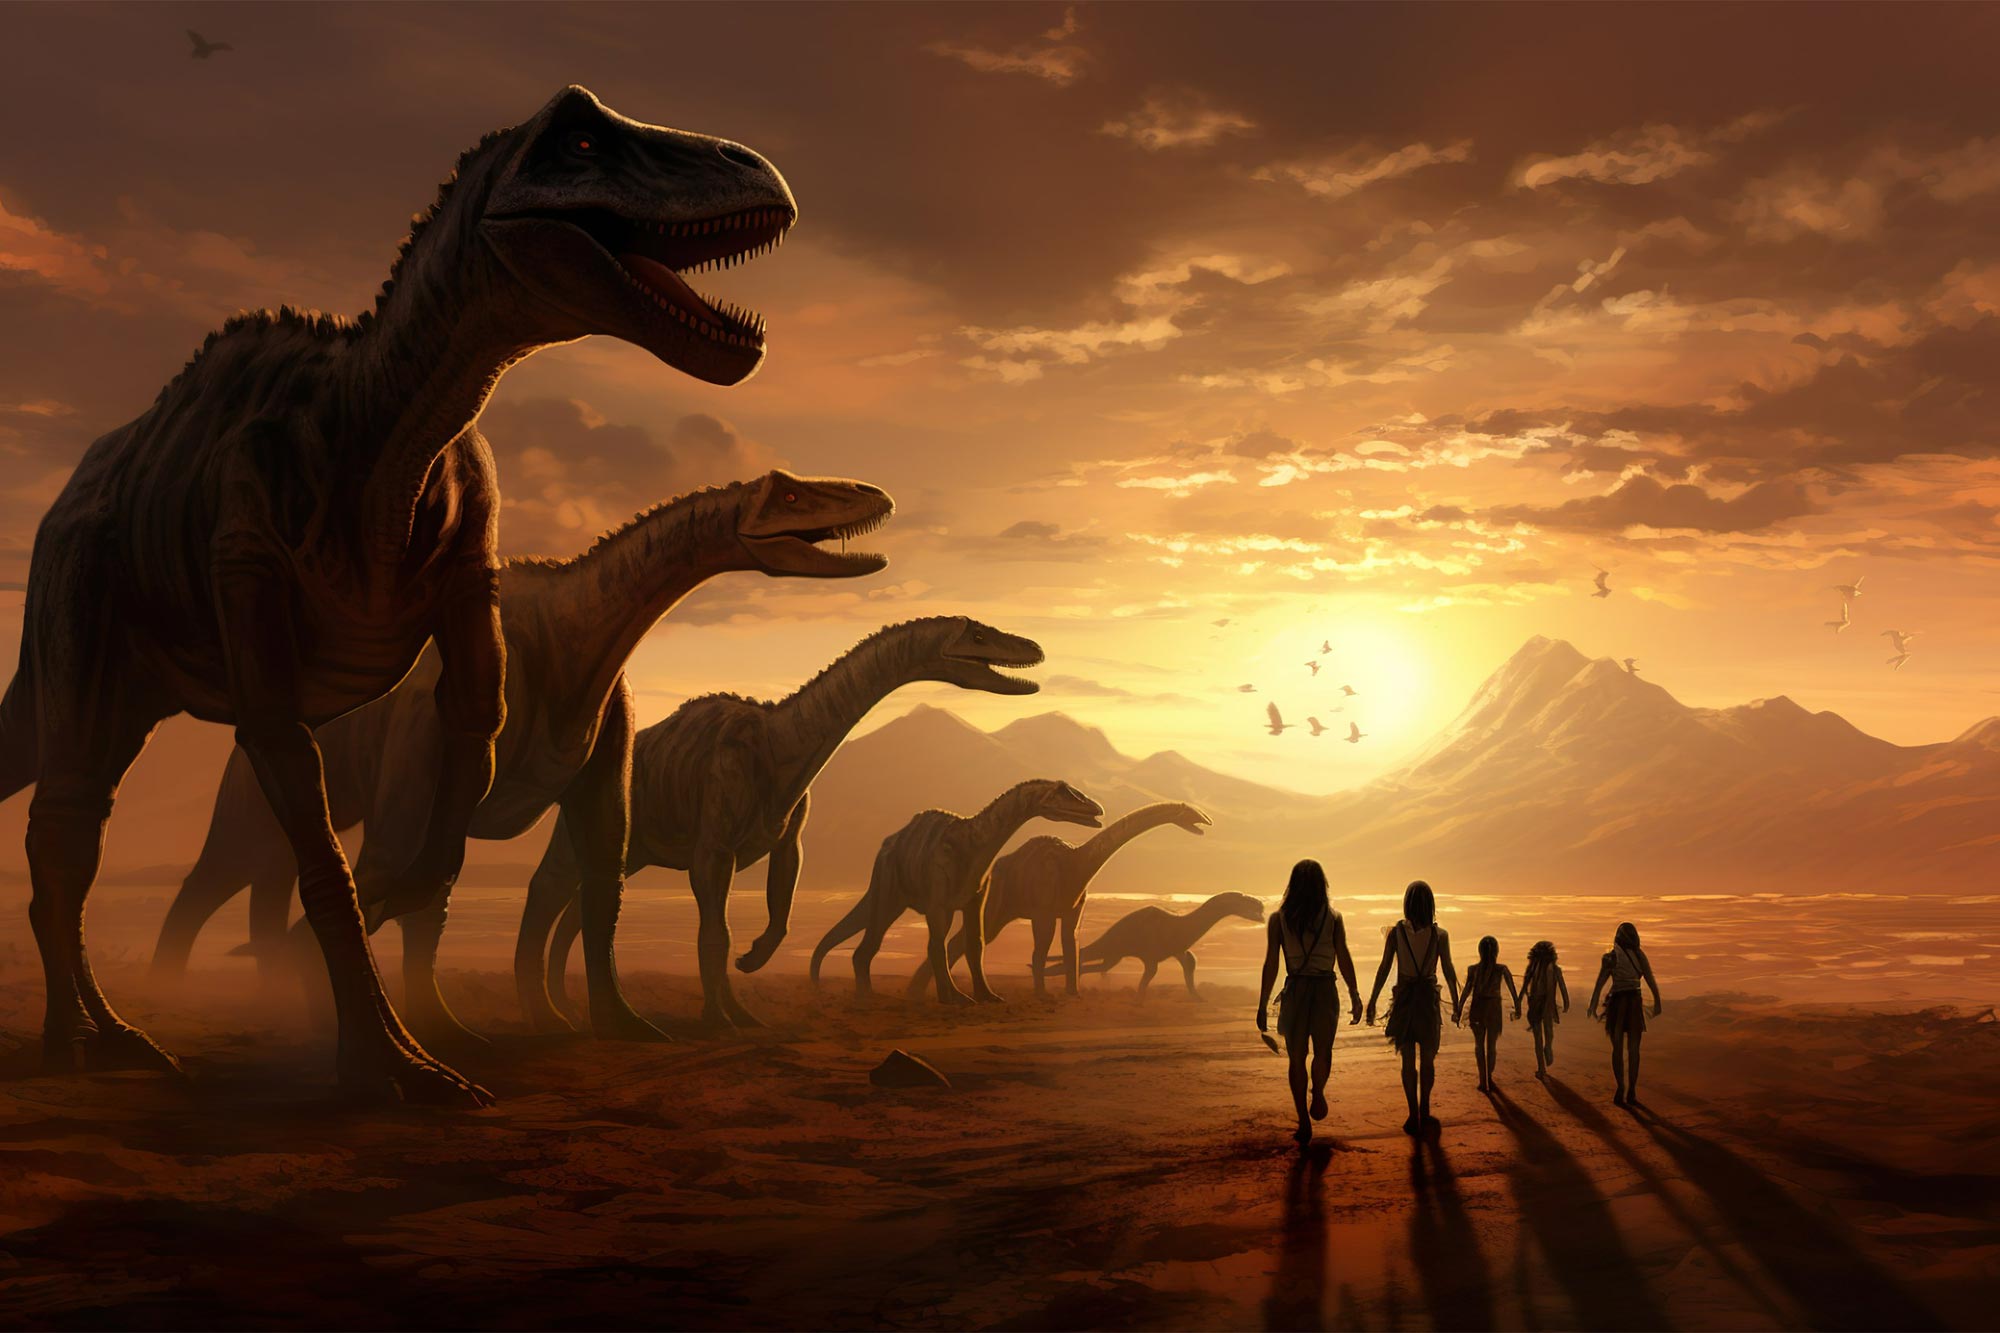 Human ancestors lived among the dinosaurs and survived an asteroid strike